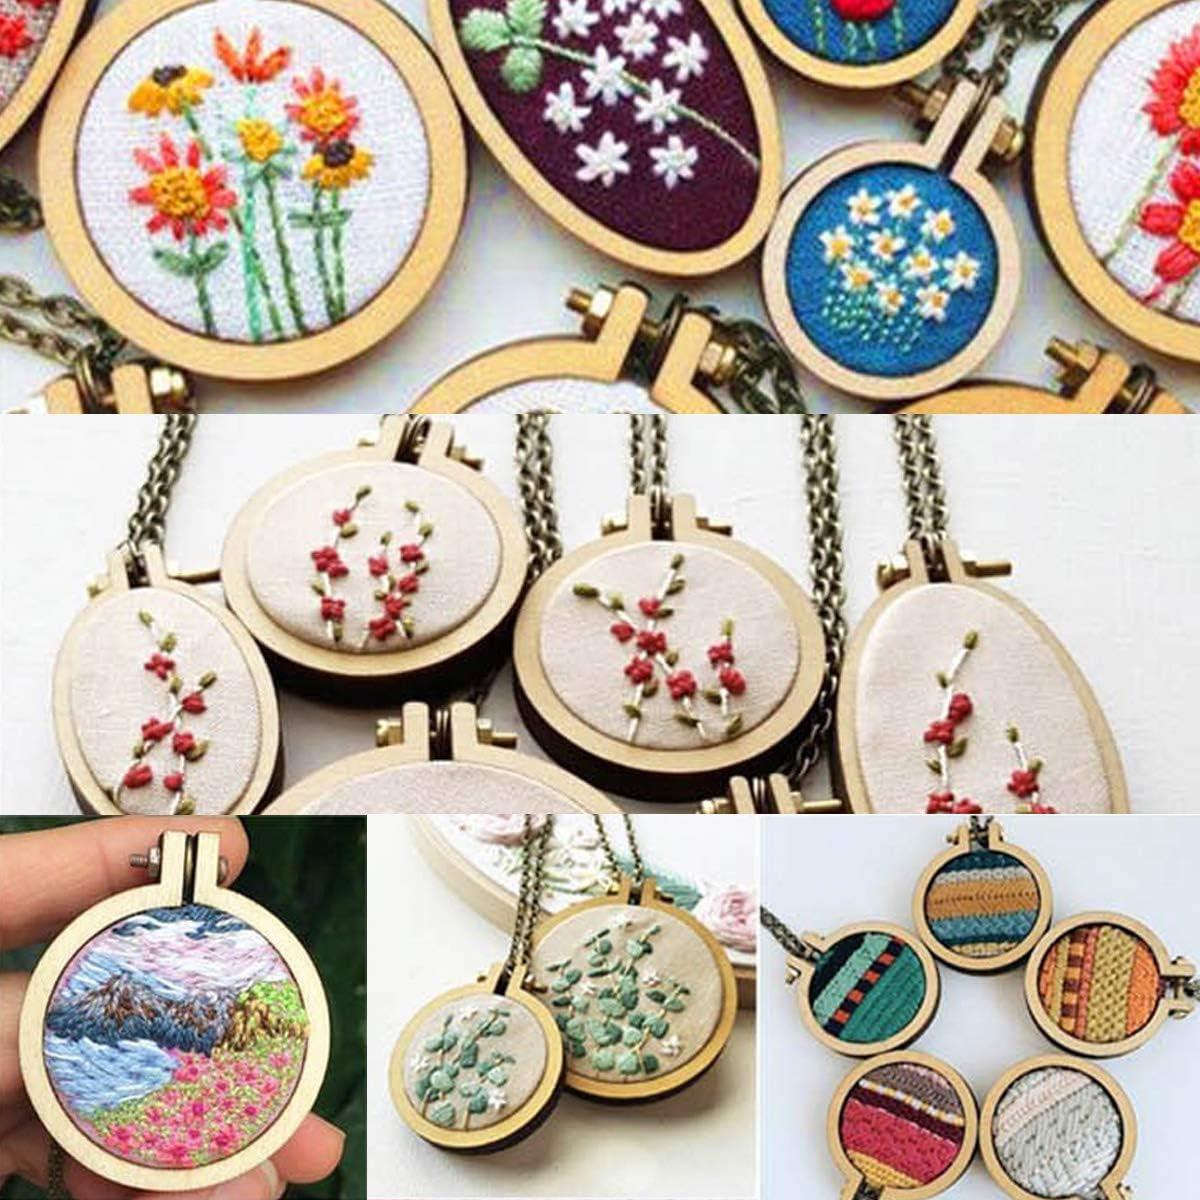 Caydo 6 Pieces Embroidery Hoop Set Bamboo Circle Cross Stitch Hoop Ring 4  inch to 10 inch for Embroidery and Cross Stitch